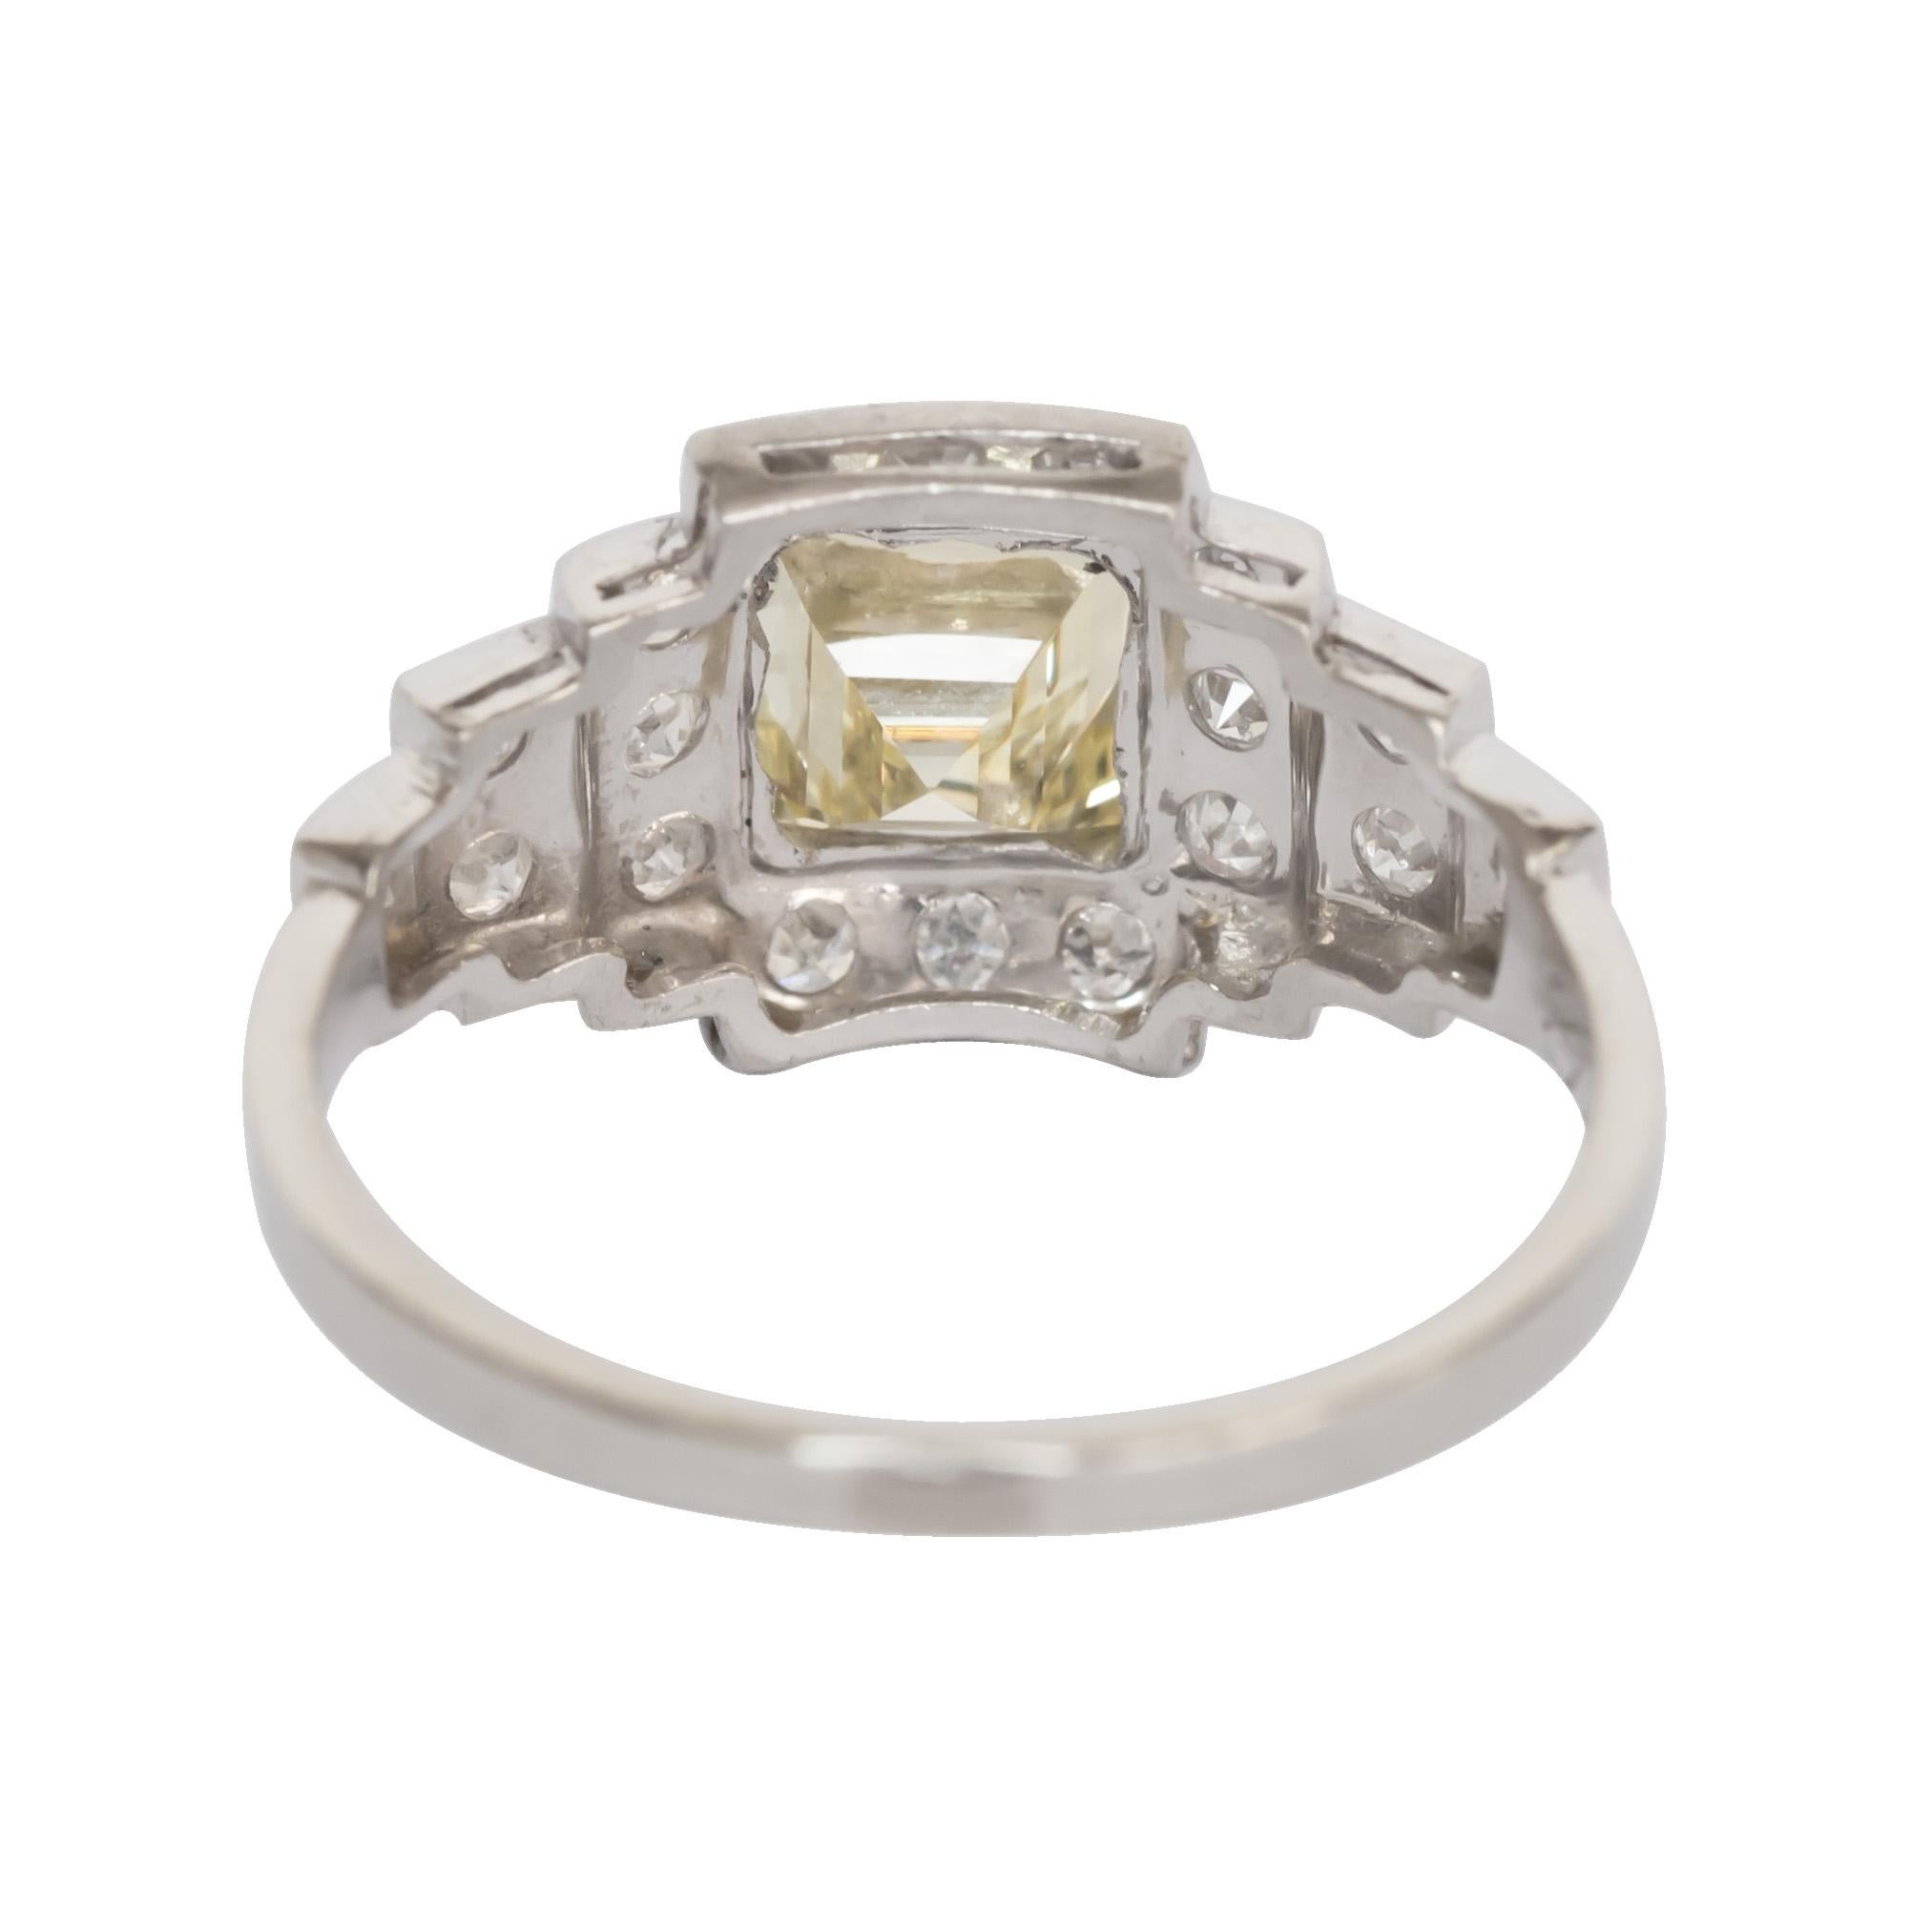 Art Deco GIA Certified 1.09 Carat Diamond Engagement Ring For Sale